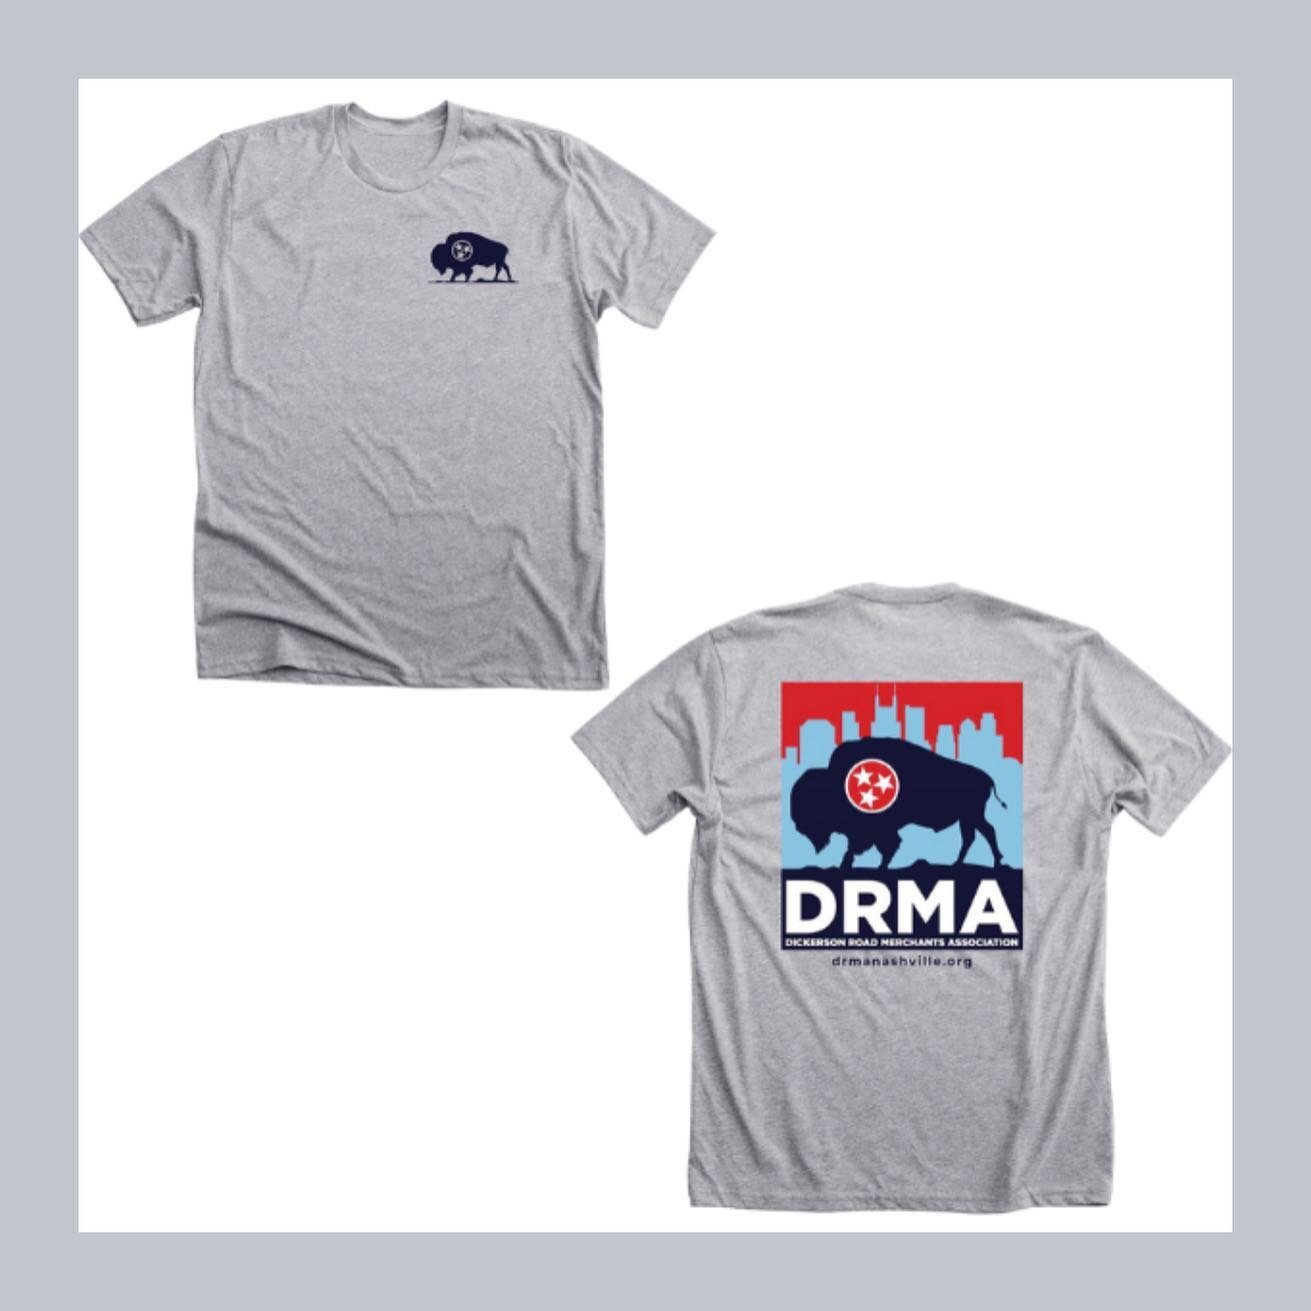 NEW DRMA t-shirts, mugs, and totes! A percentage of all merchandise sales will be donated DRMA! Link to buy in bio🦬

Make sure you share your new DRMA swag with us by tagging @drmanashville on social media!